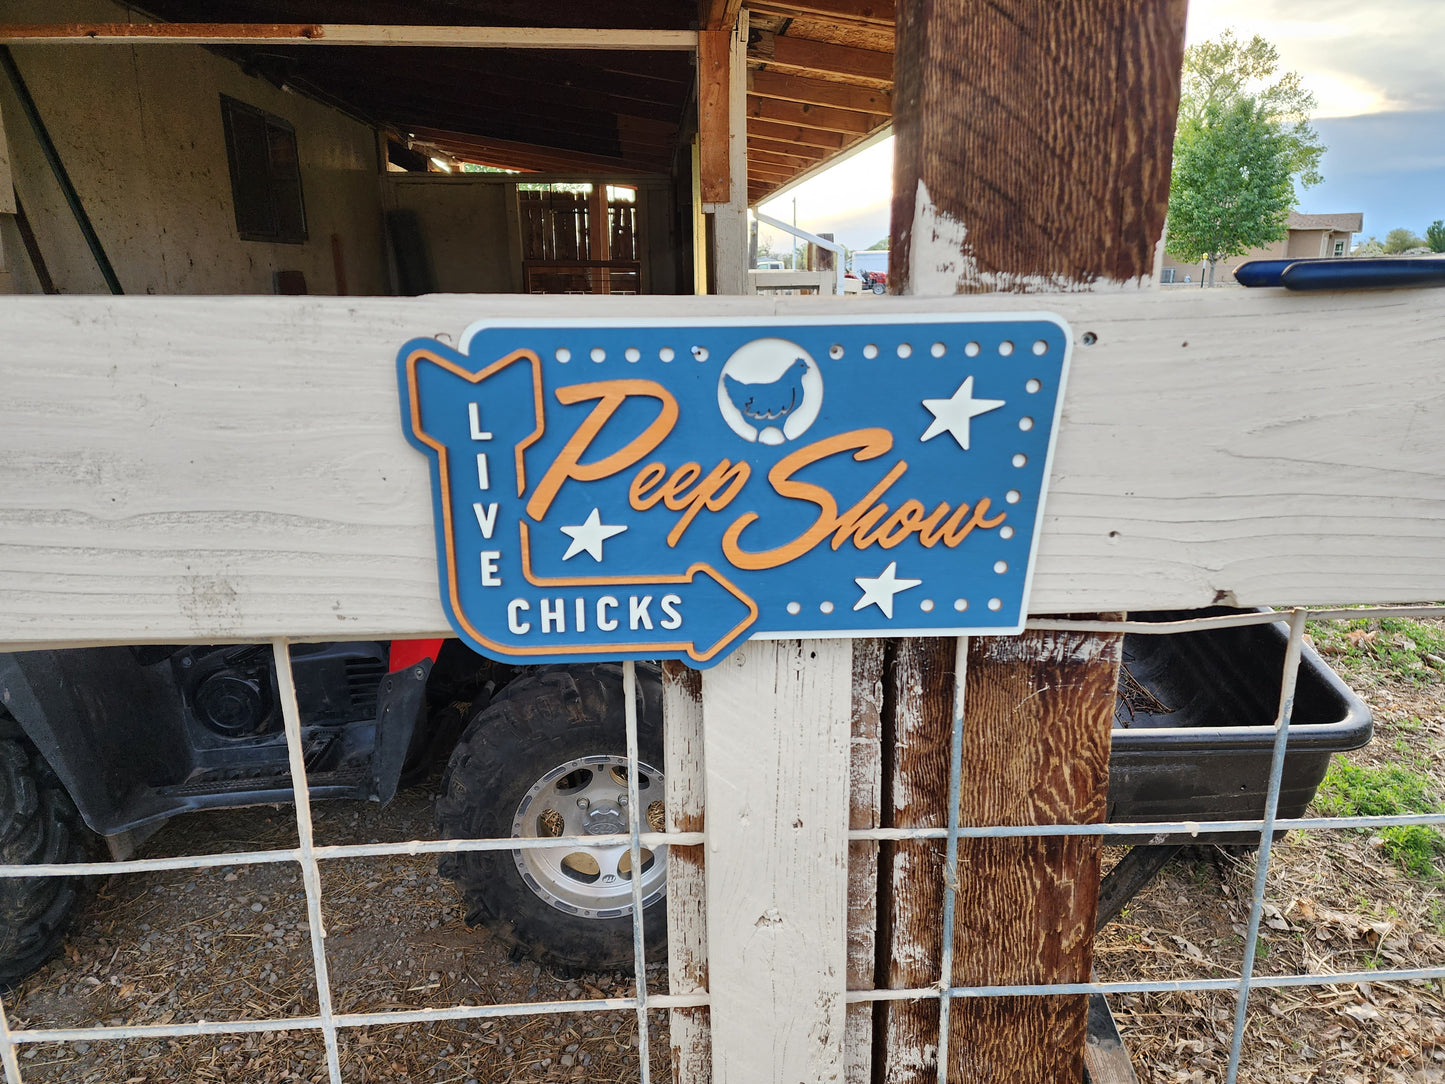 Peep Show - Multi-layer Chicken Coop Sign - Live Chicks!